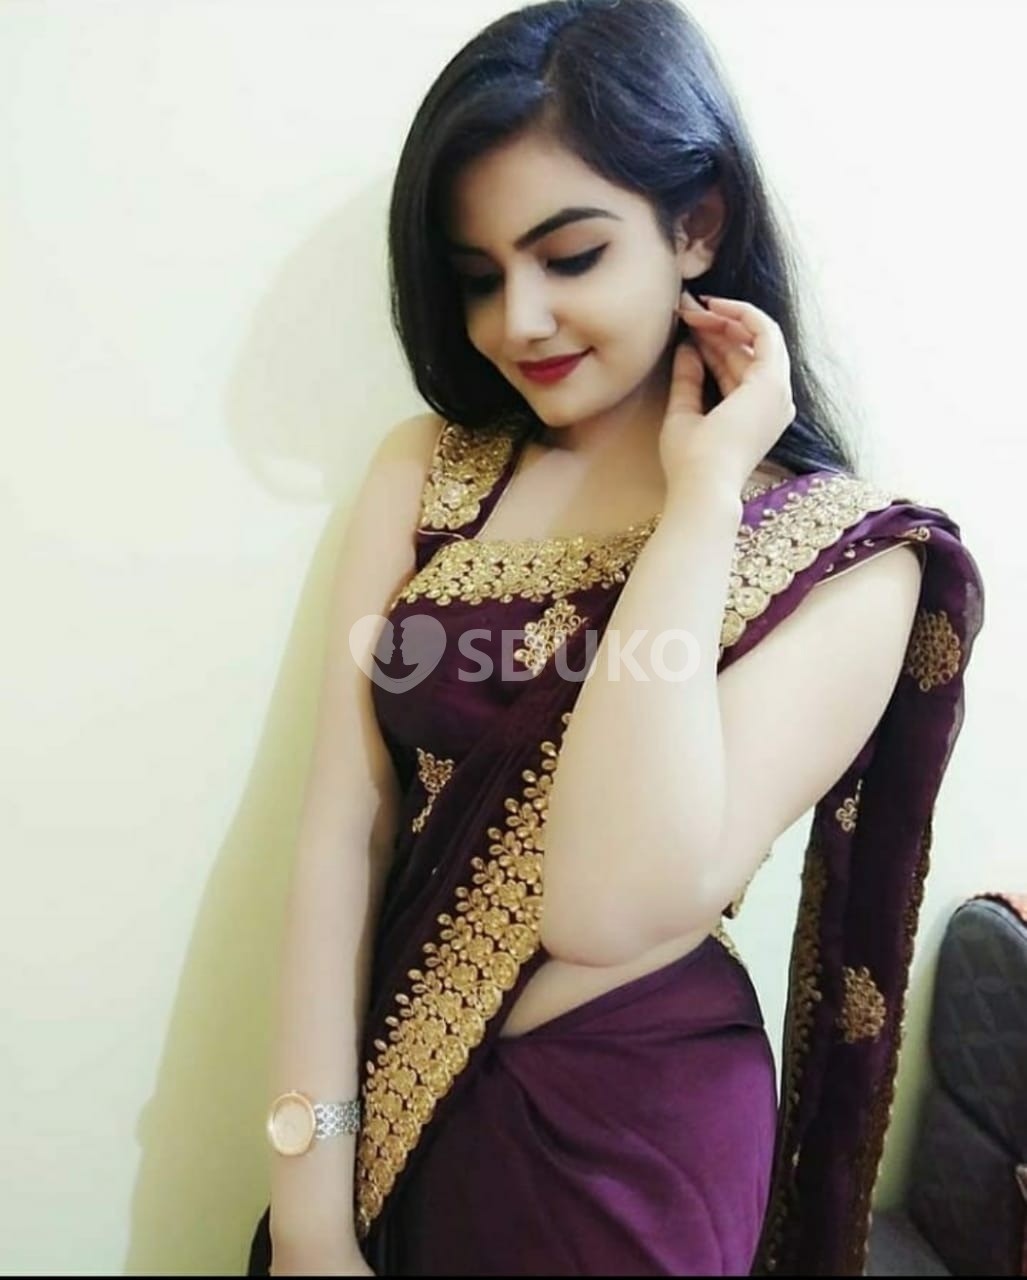 Faridabad ☎️ TODAY VIP LOW PRICE ESCORT FULL HARD FUCK WITH NAUGHTY IF YOU WANT TO FUCK MY PUSSY WITH BIG BOOBS GIRL